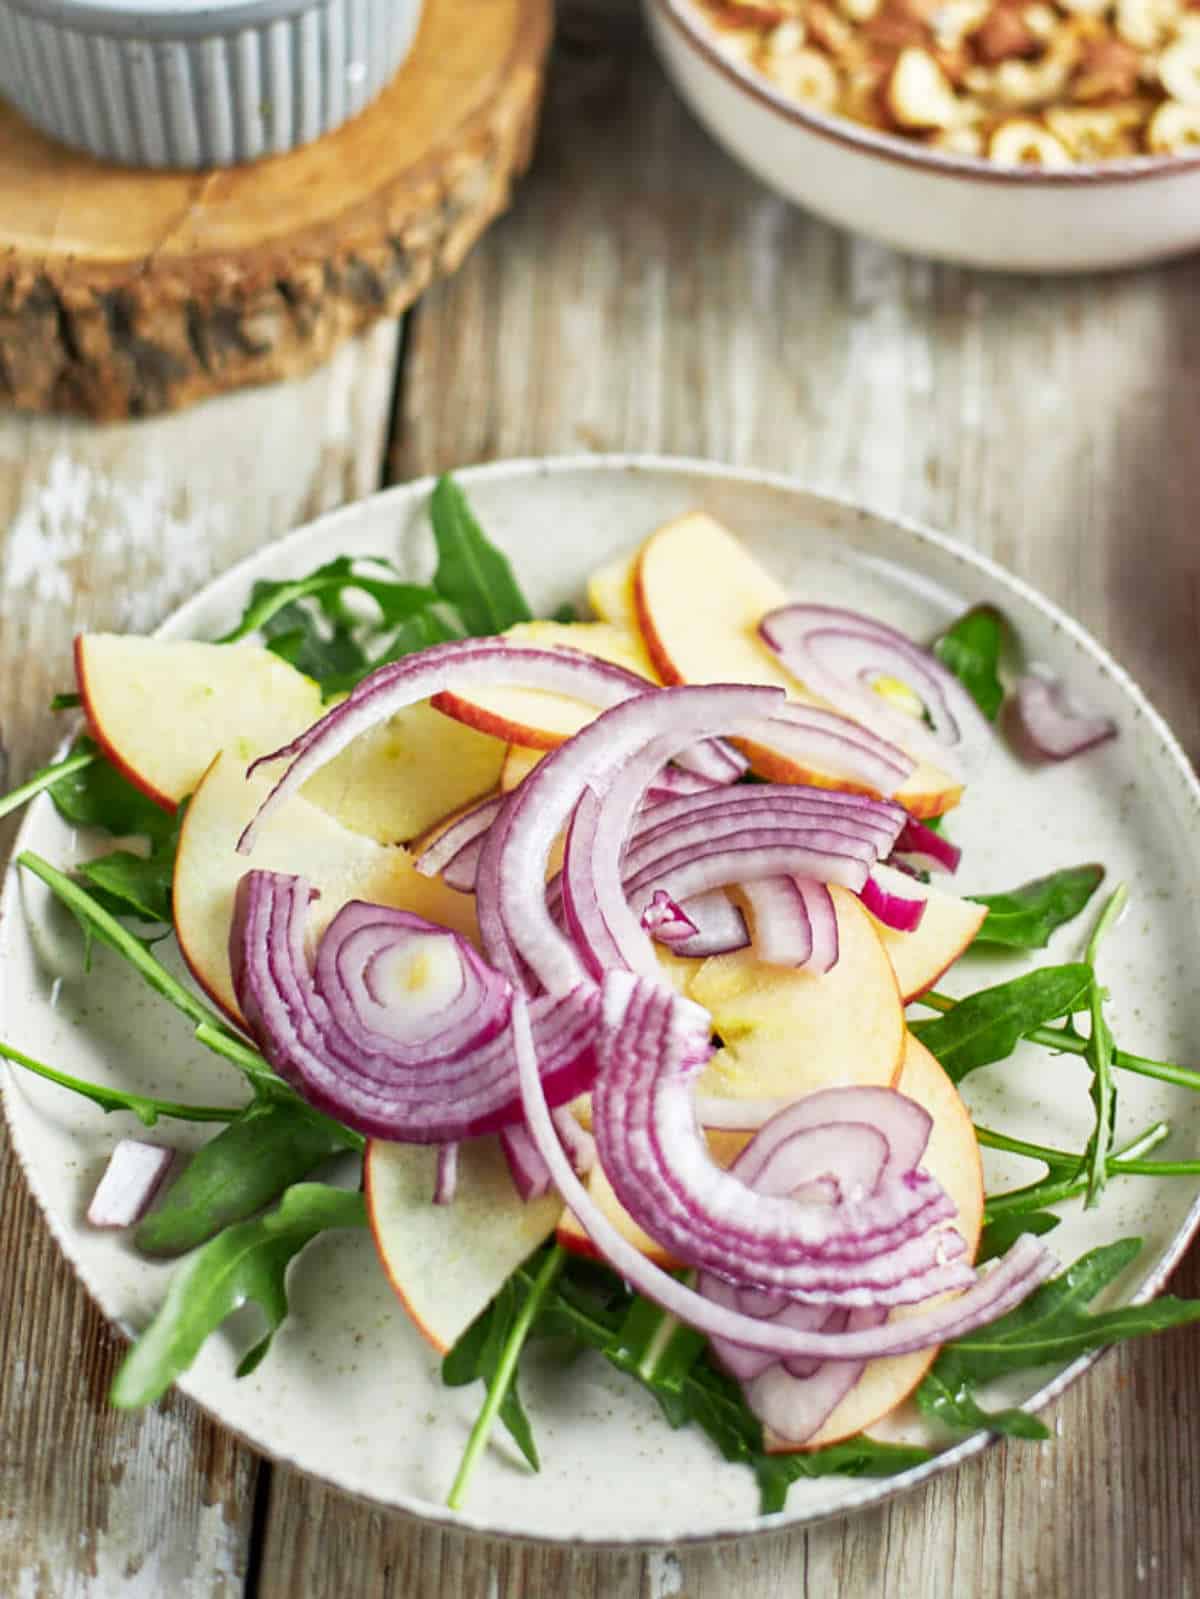 Sliced red onions on a plate with arugula and apple slices.